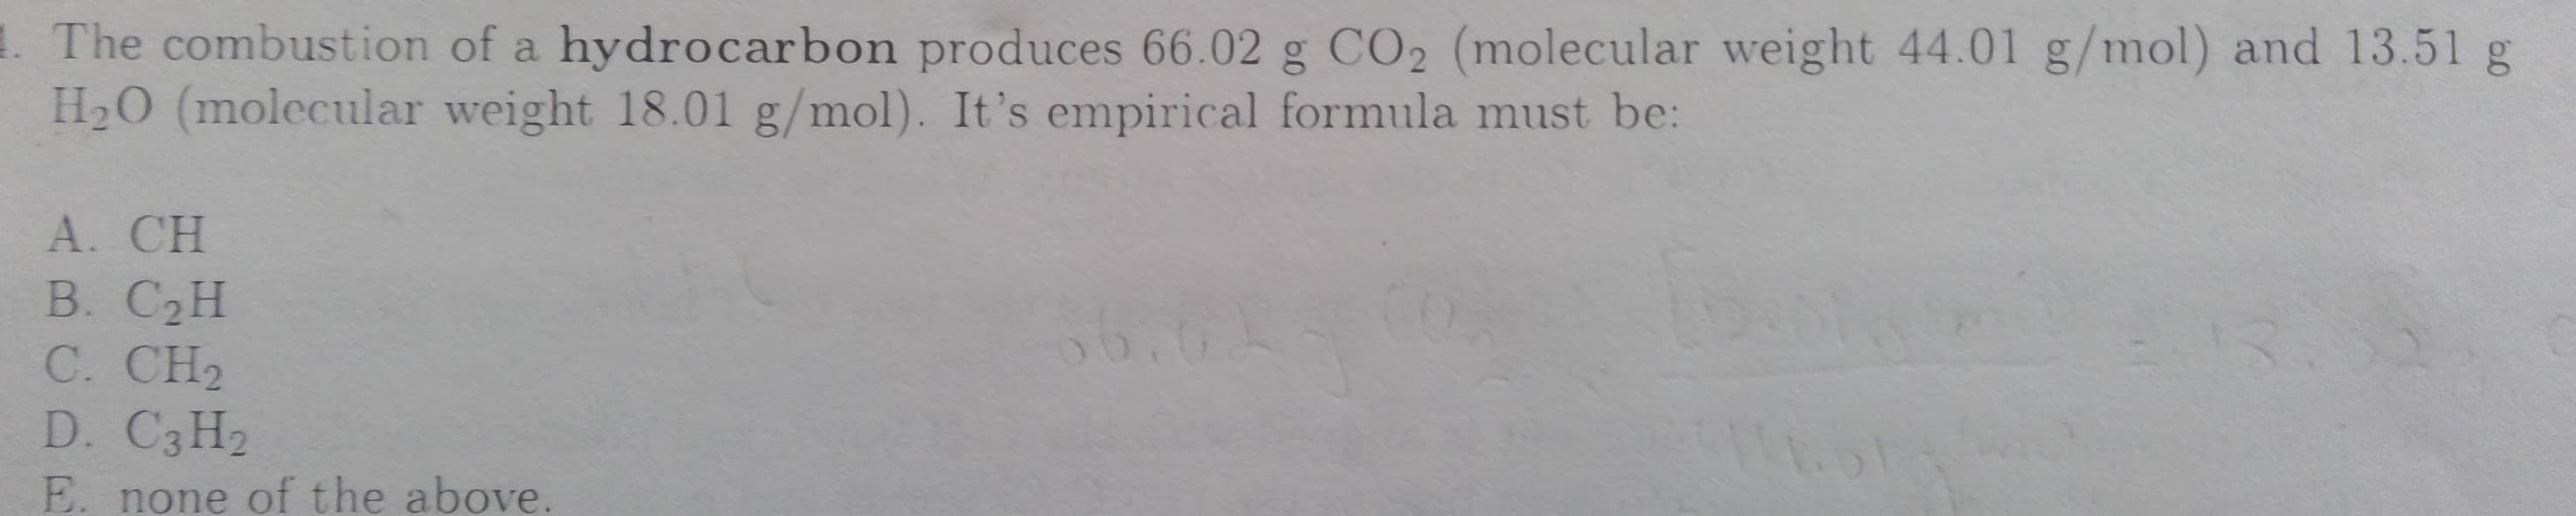 The combustion of a hydrocarbon produces 66.02 g CO2 (molecular weight 44.01 g/mol) and 13.51 g
H2O (molecular weight 18.01 g/mol). It's empirical formula must be:
А. CH
В. СаН
C. CH2
D. C3H2
E. none of the above.
